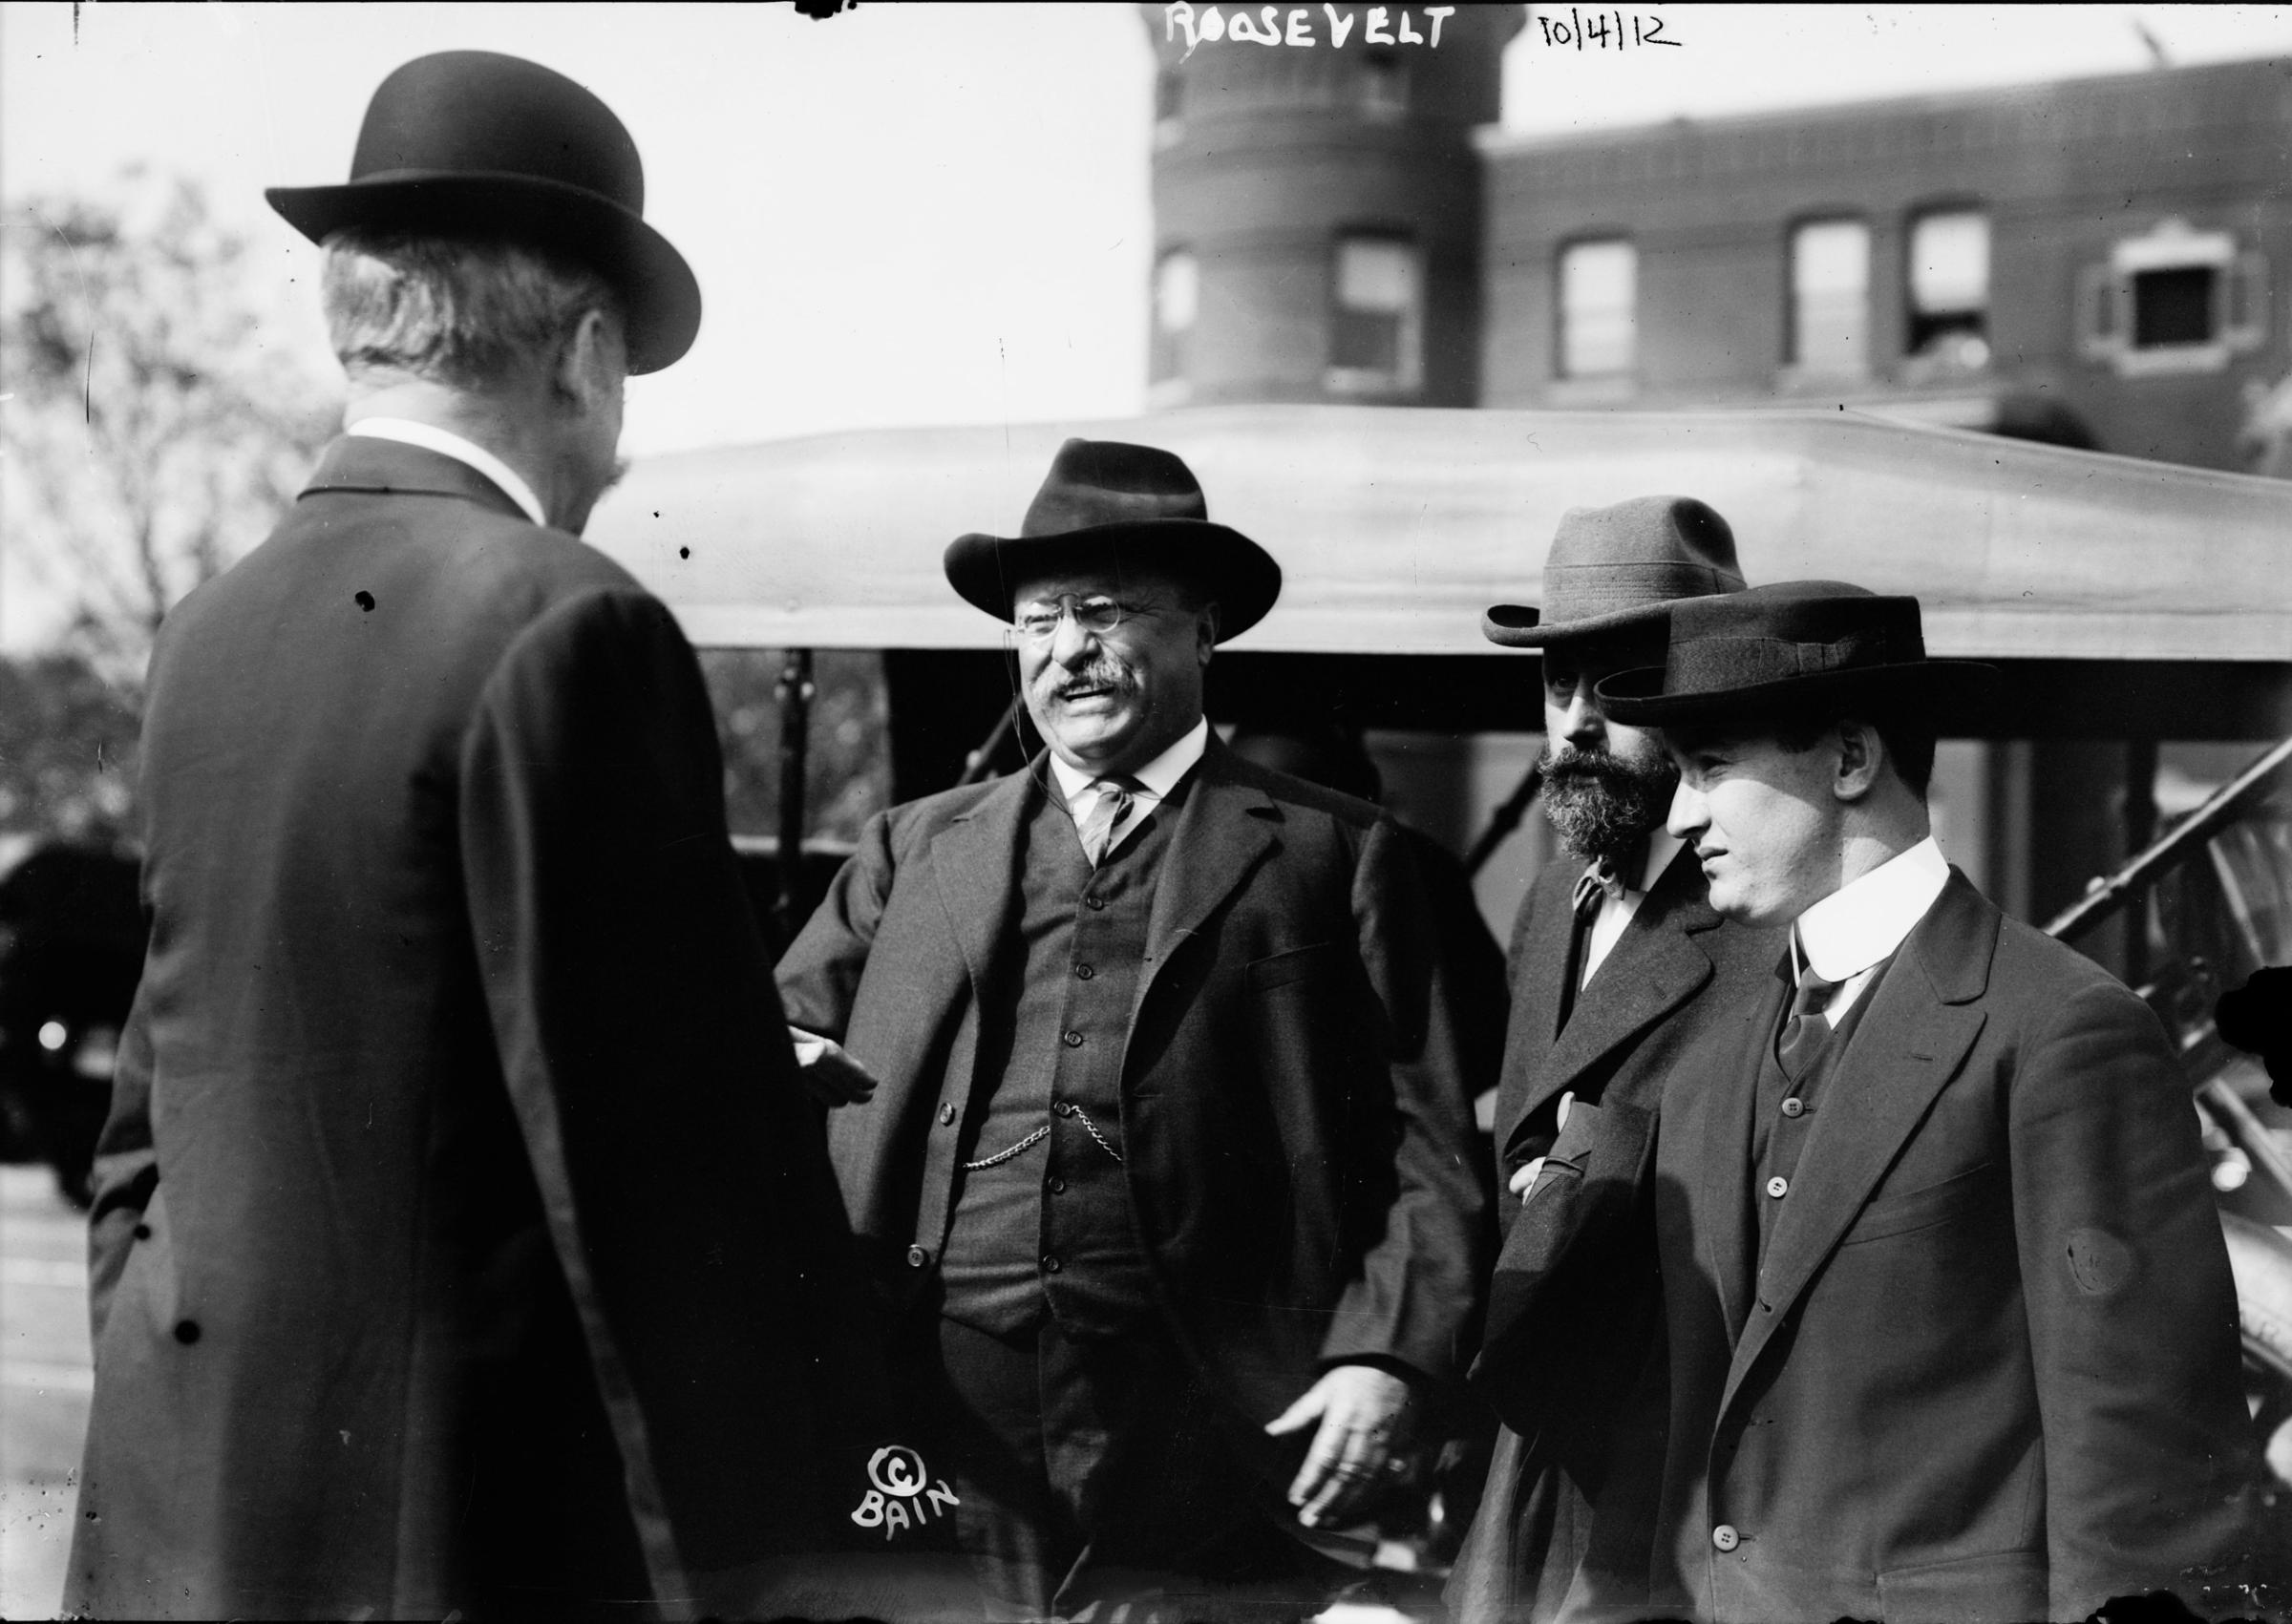 Theodore Roosevelt Shortly Before Assassination Attempt